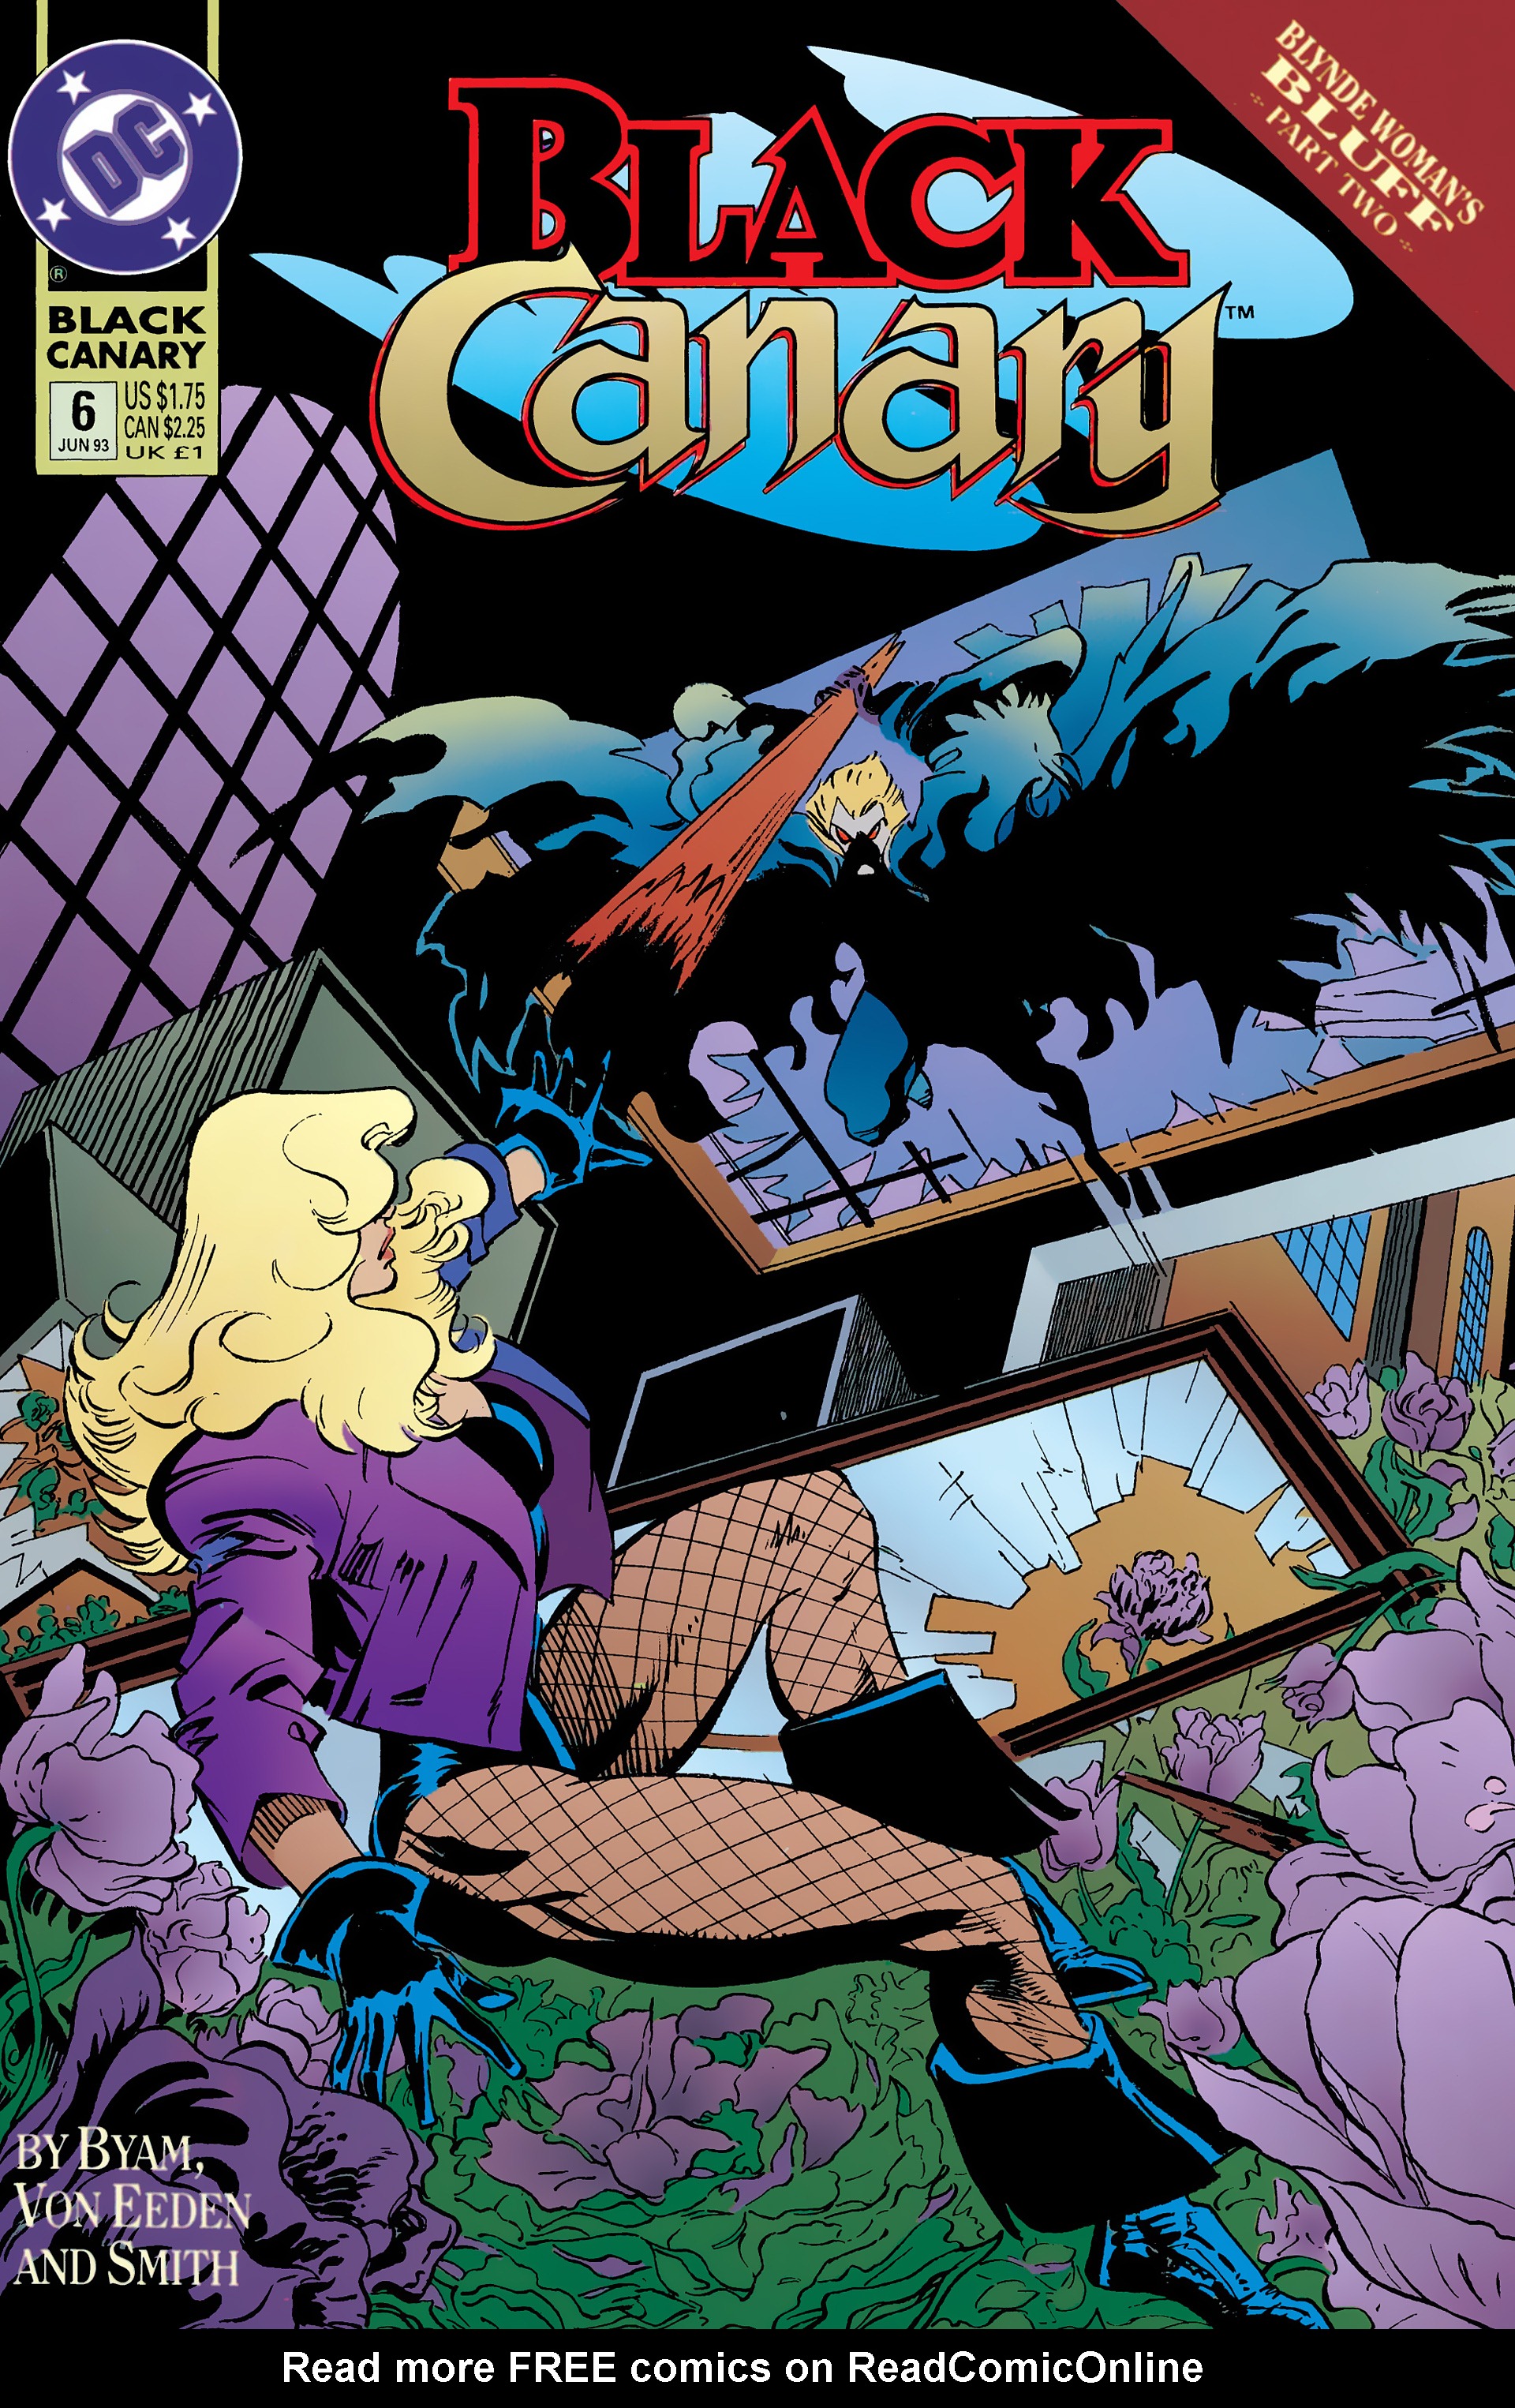 Black Canary 1993 Issue 6 | Viewcomic reading comics online ...